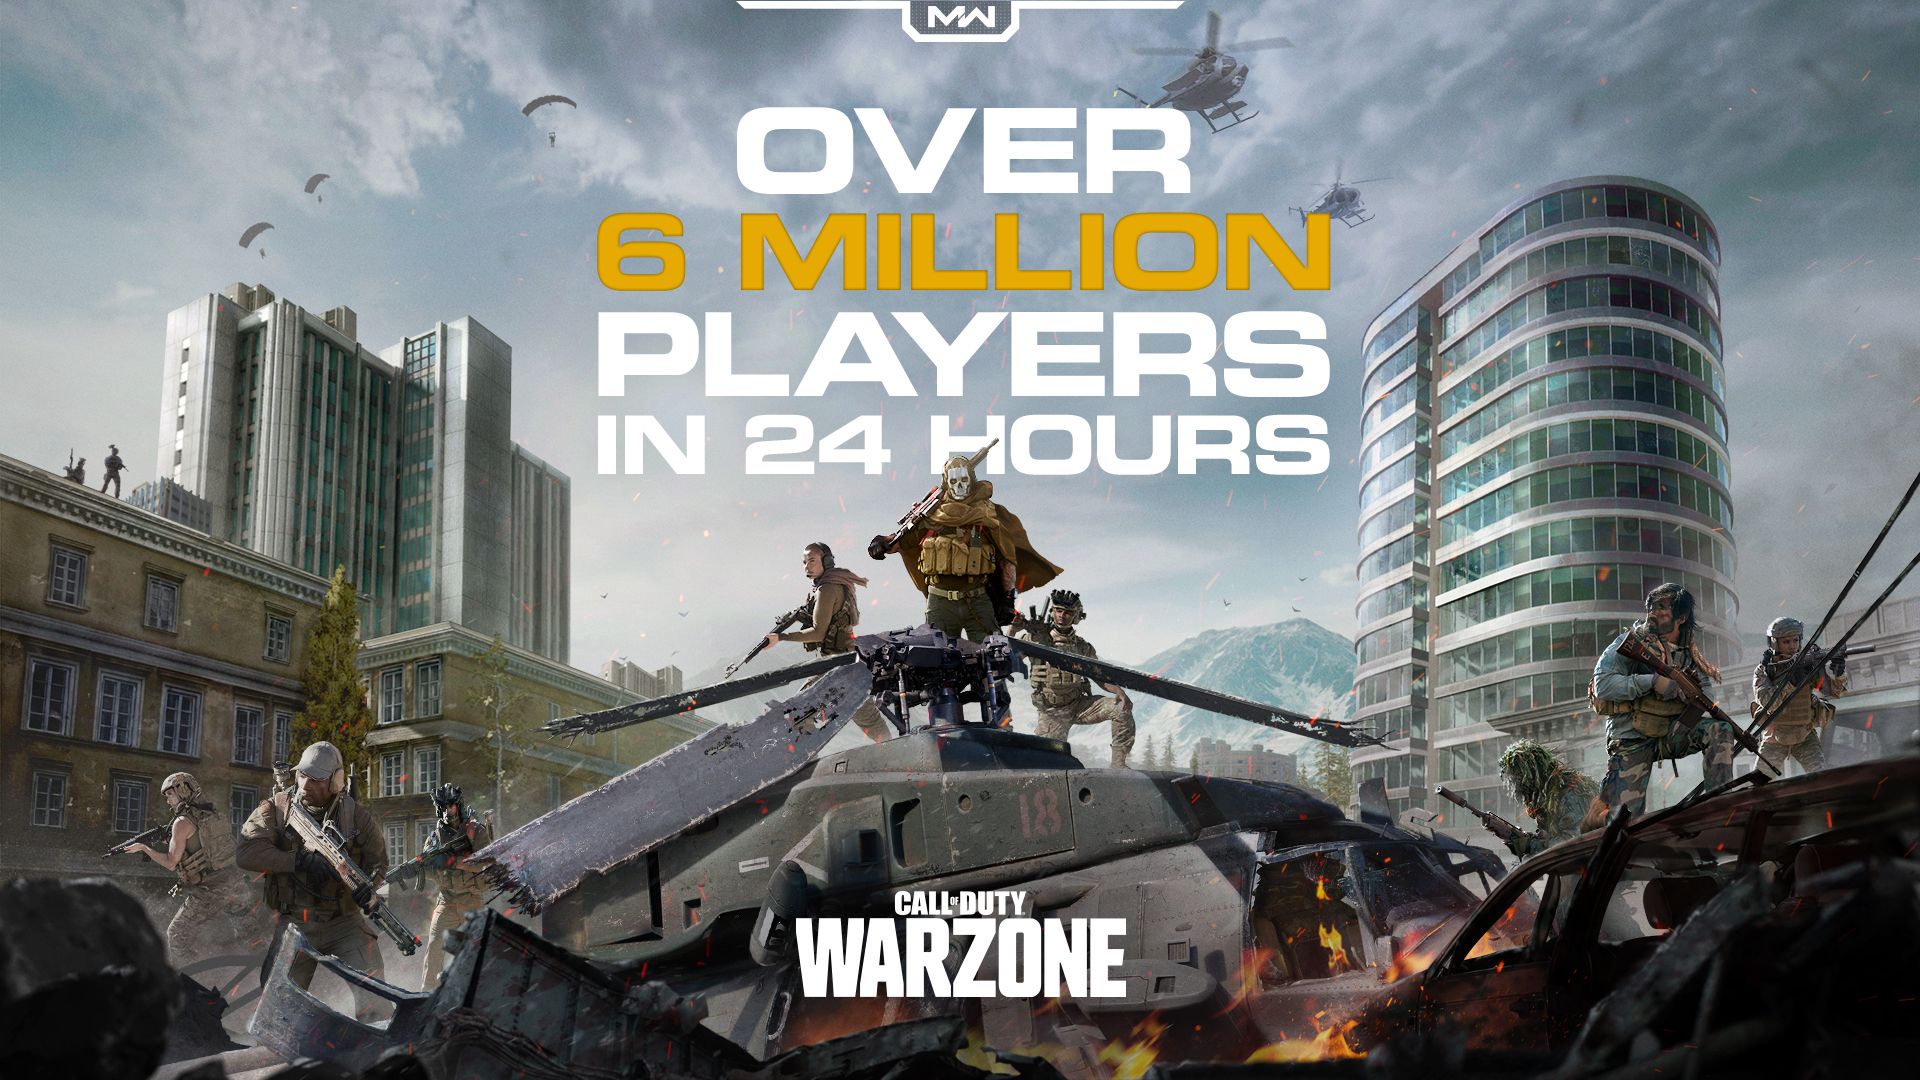 Call of Duty Warzone hit 6 million players in just one day